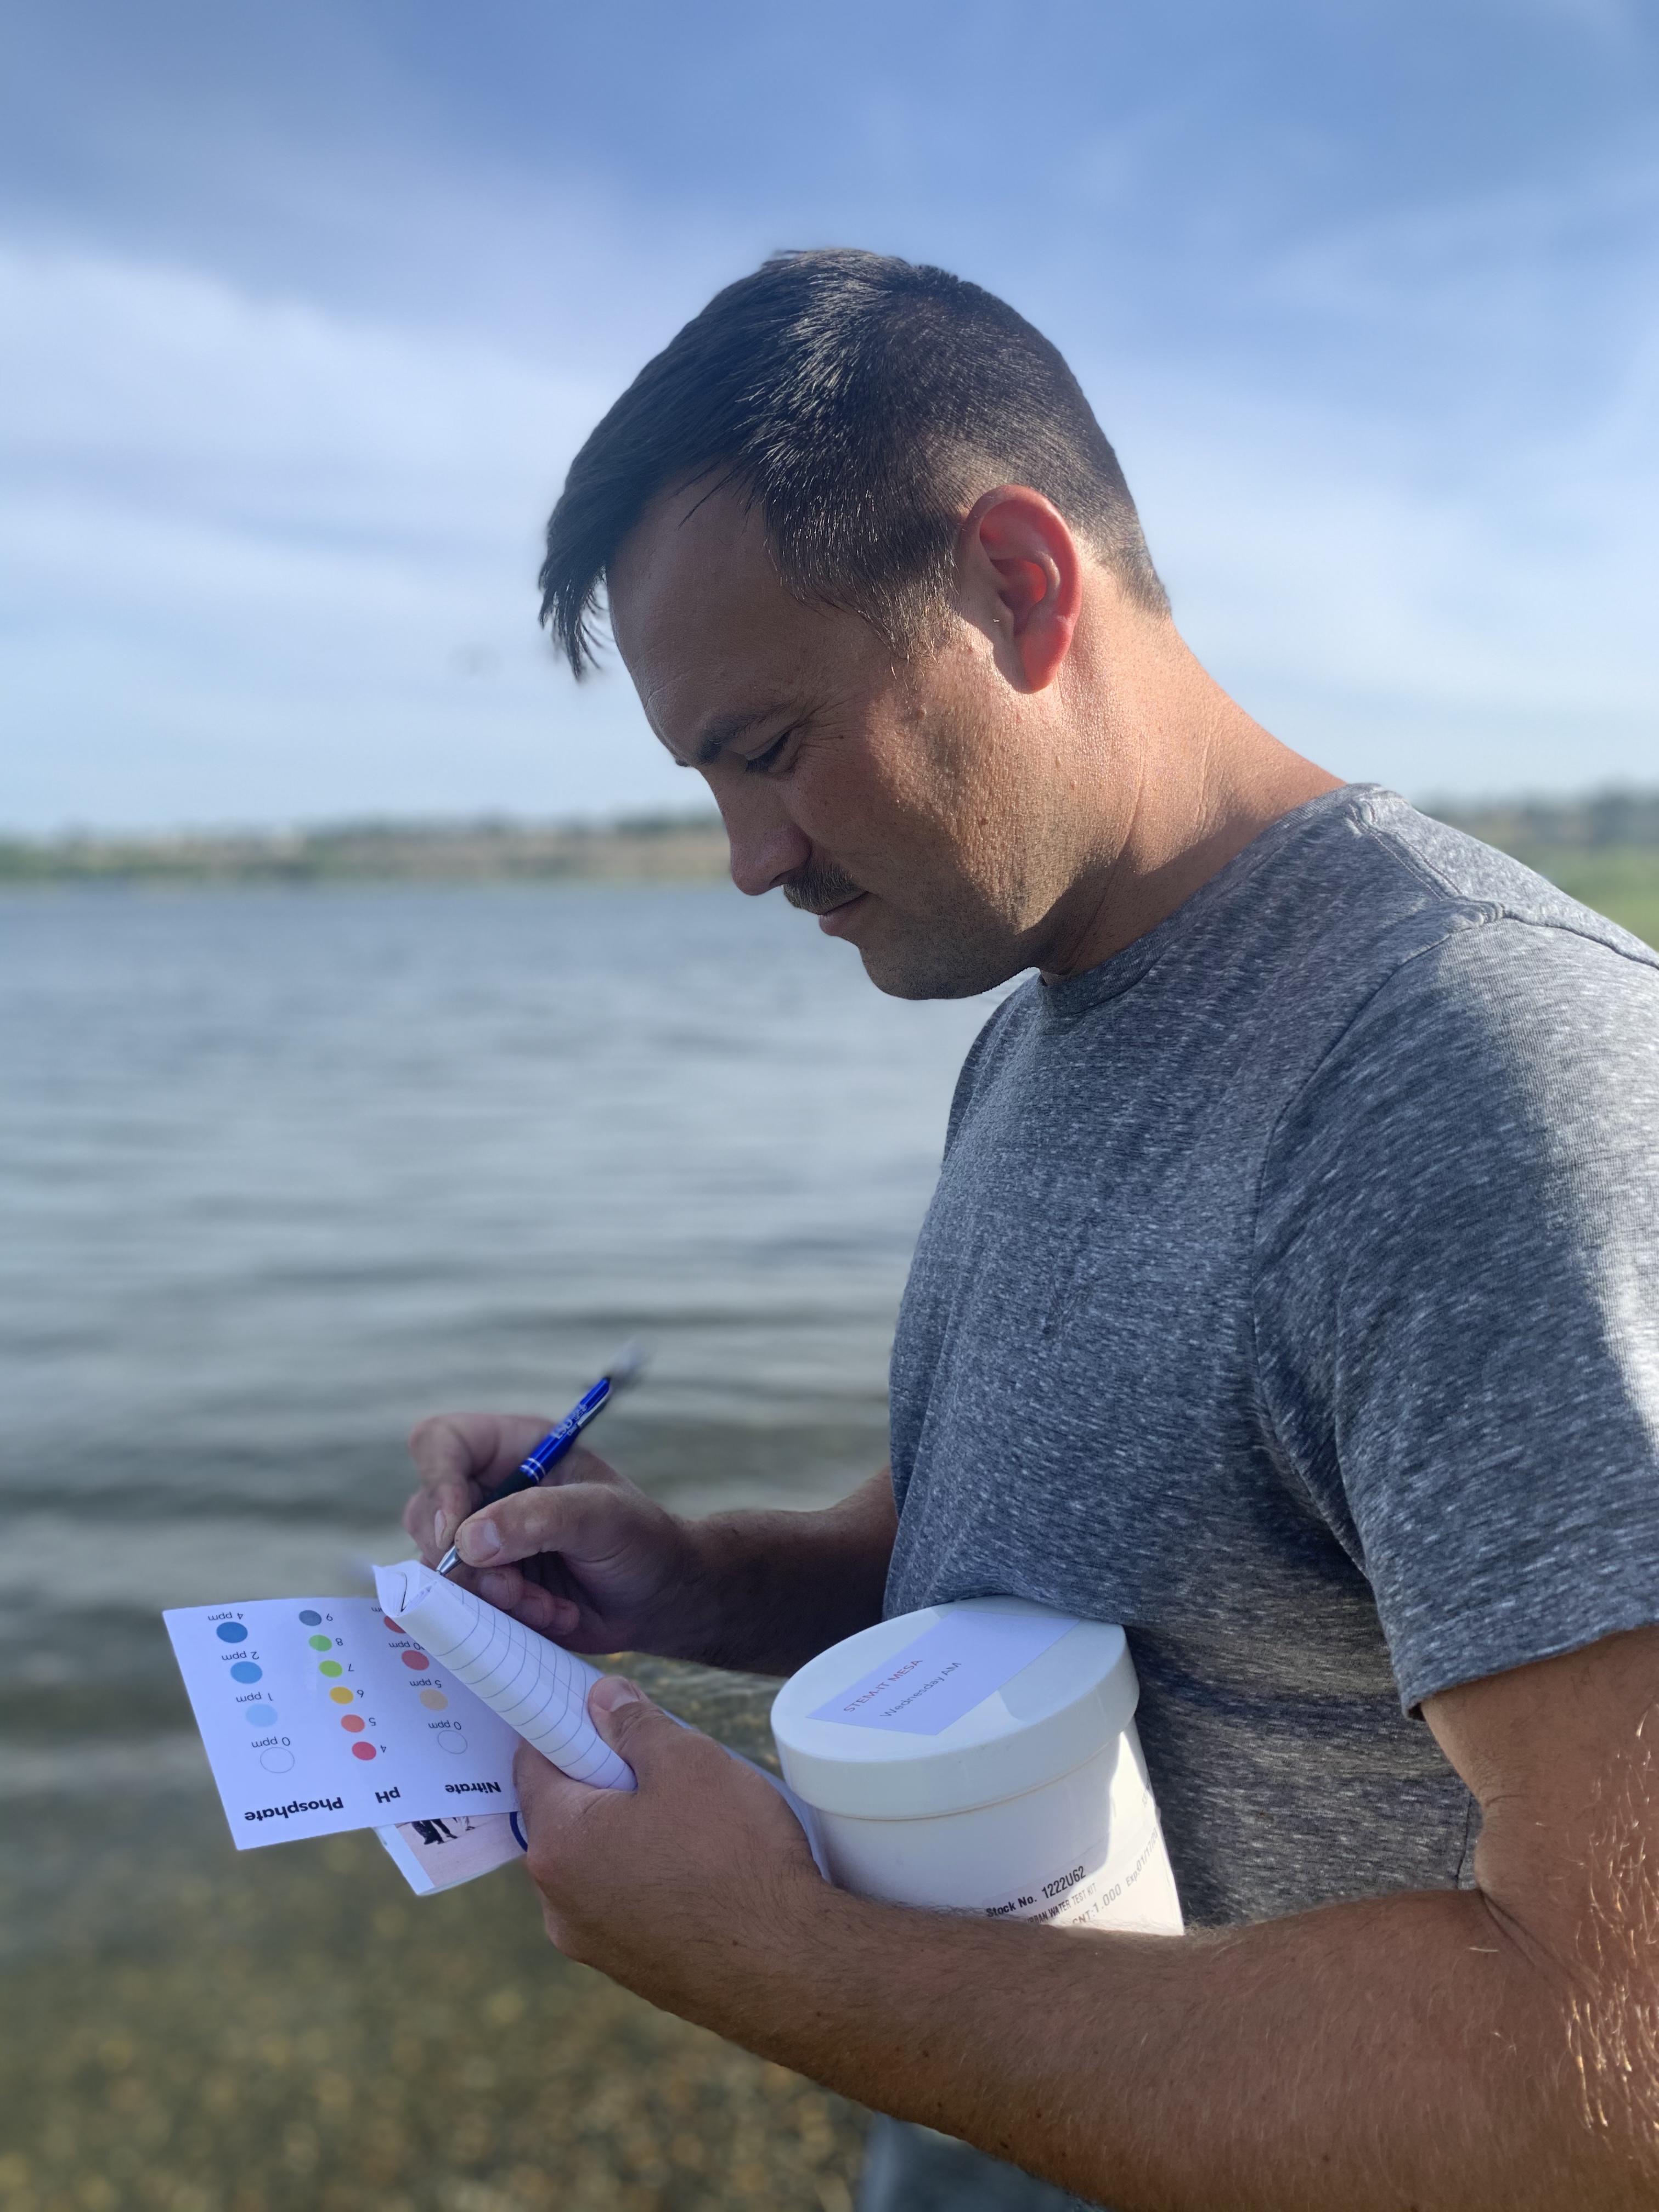 Teacher takes notes by river